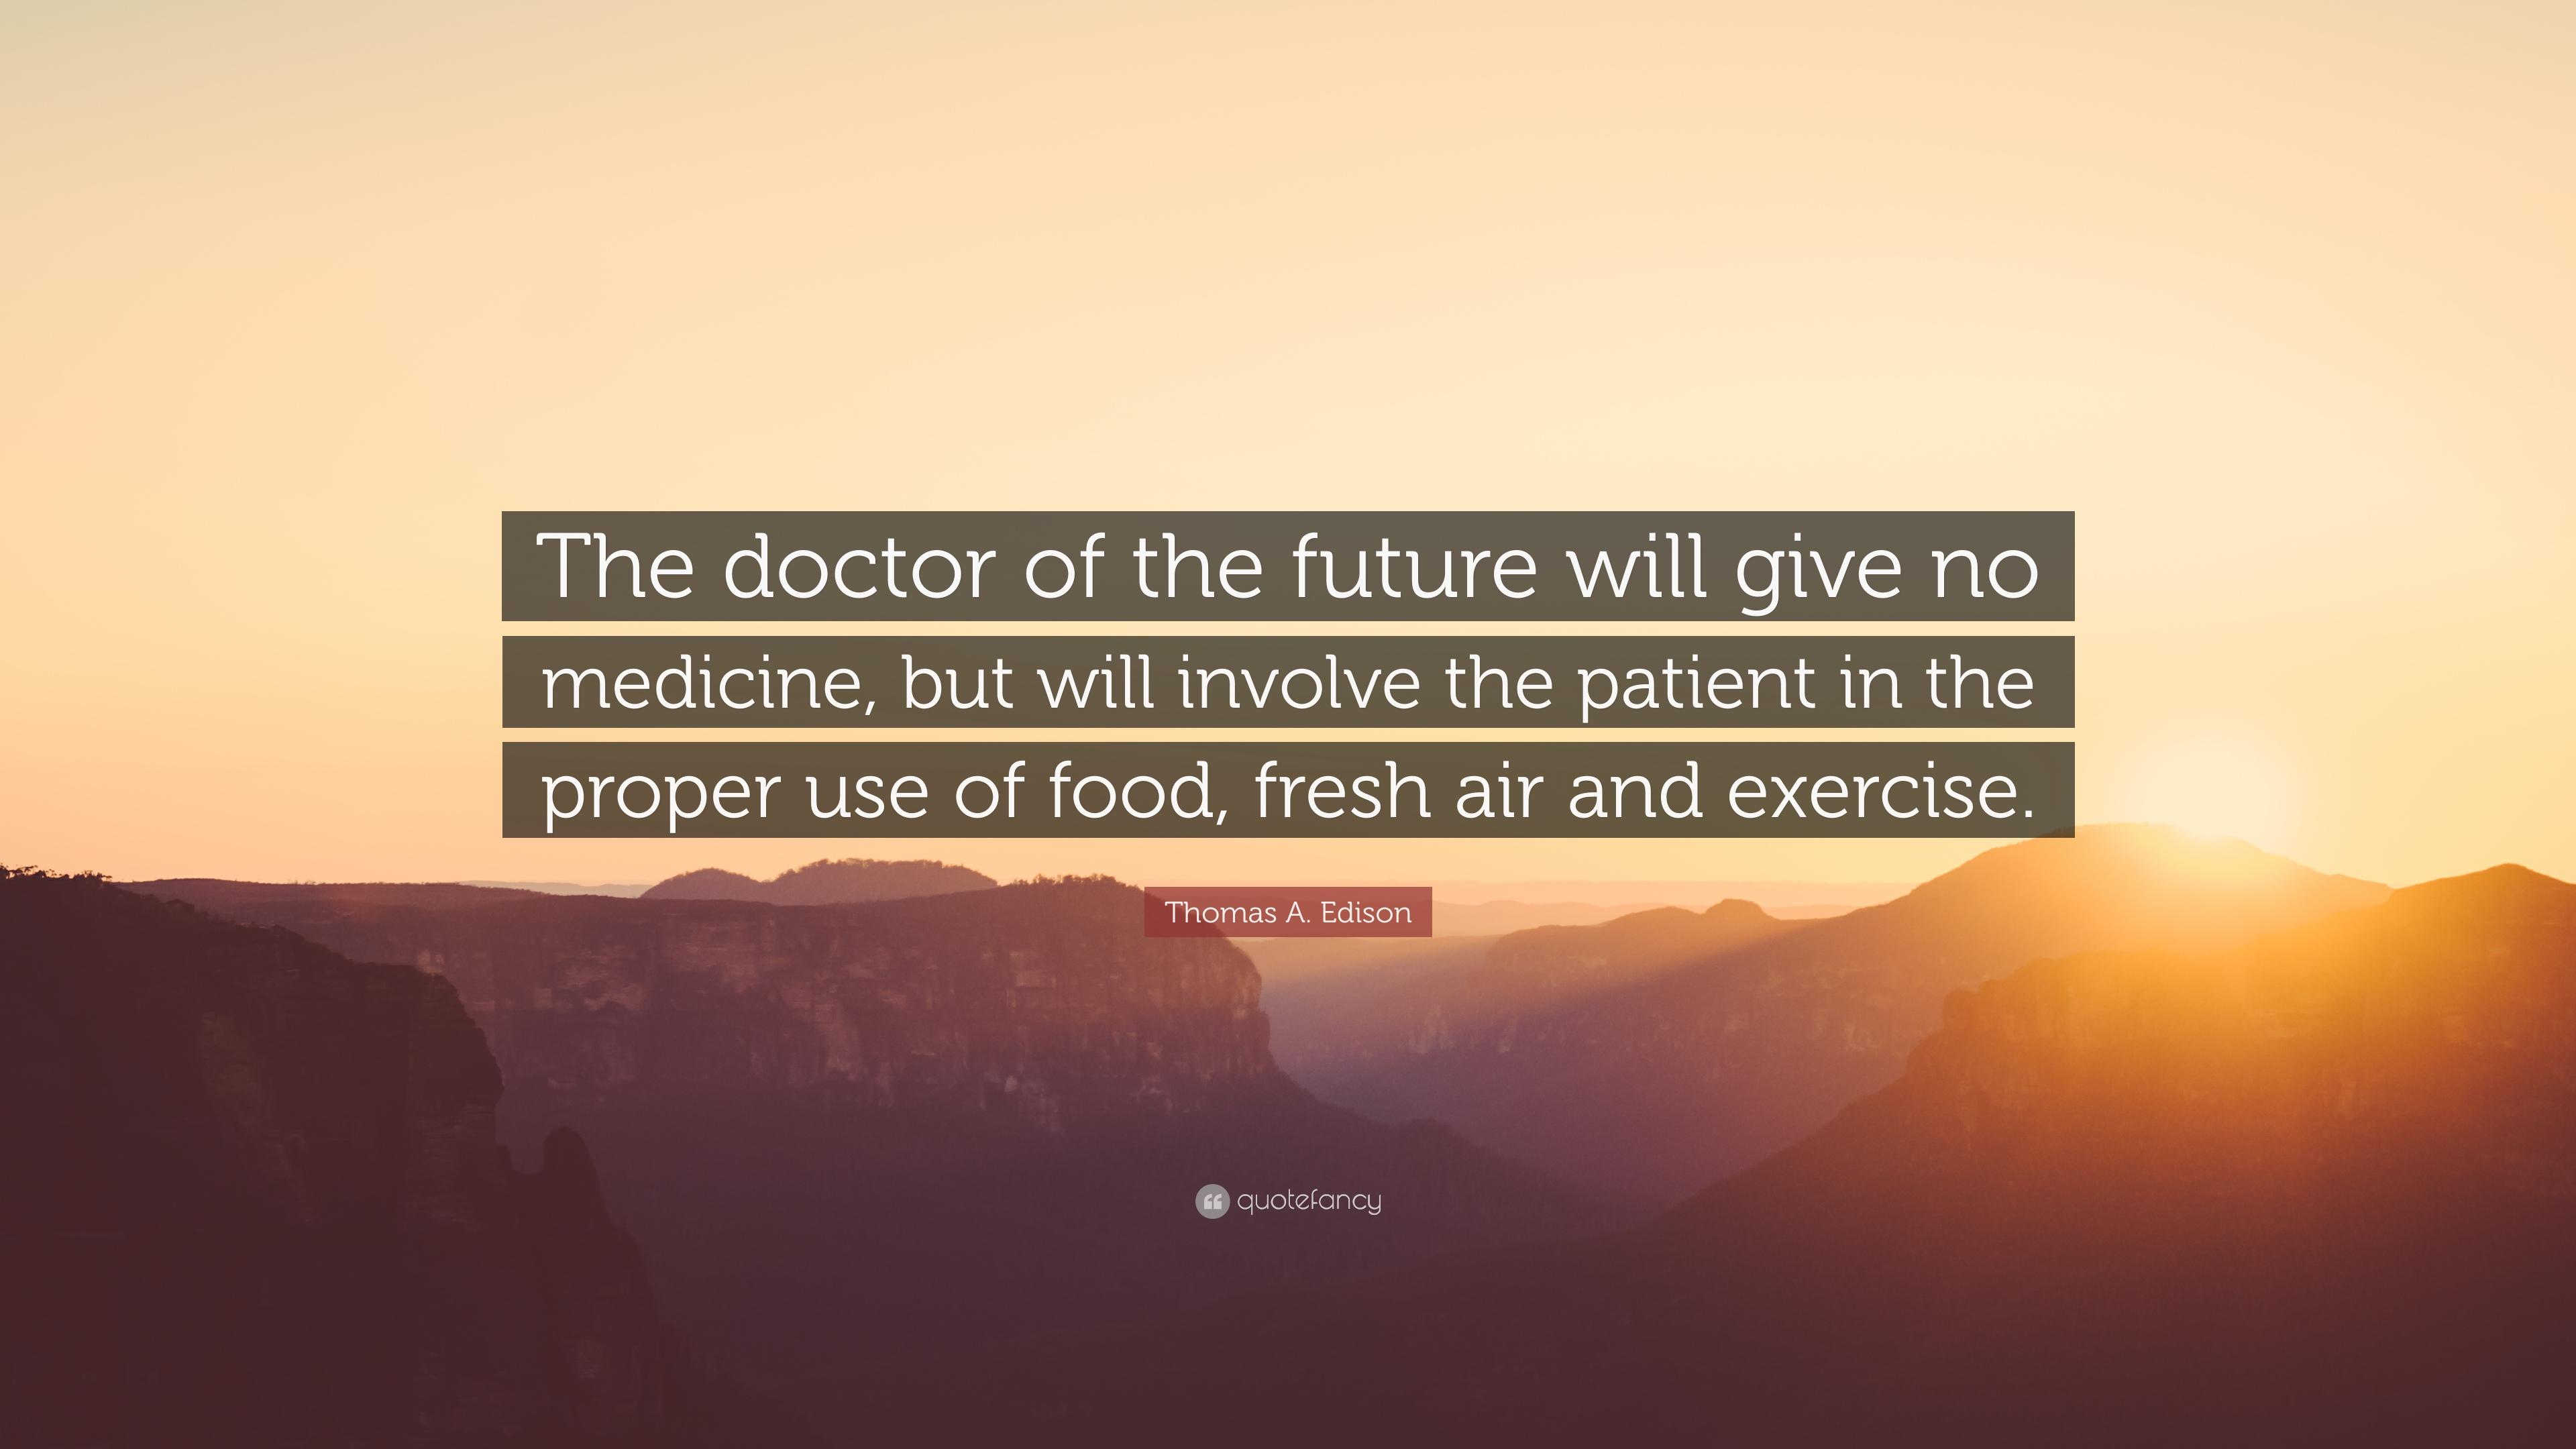 Thomas A. Edison Quote: “The doctor of the future will give no